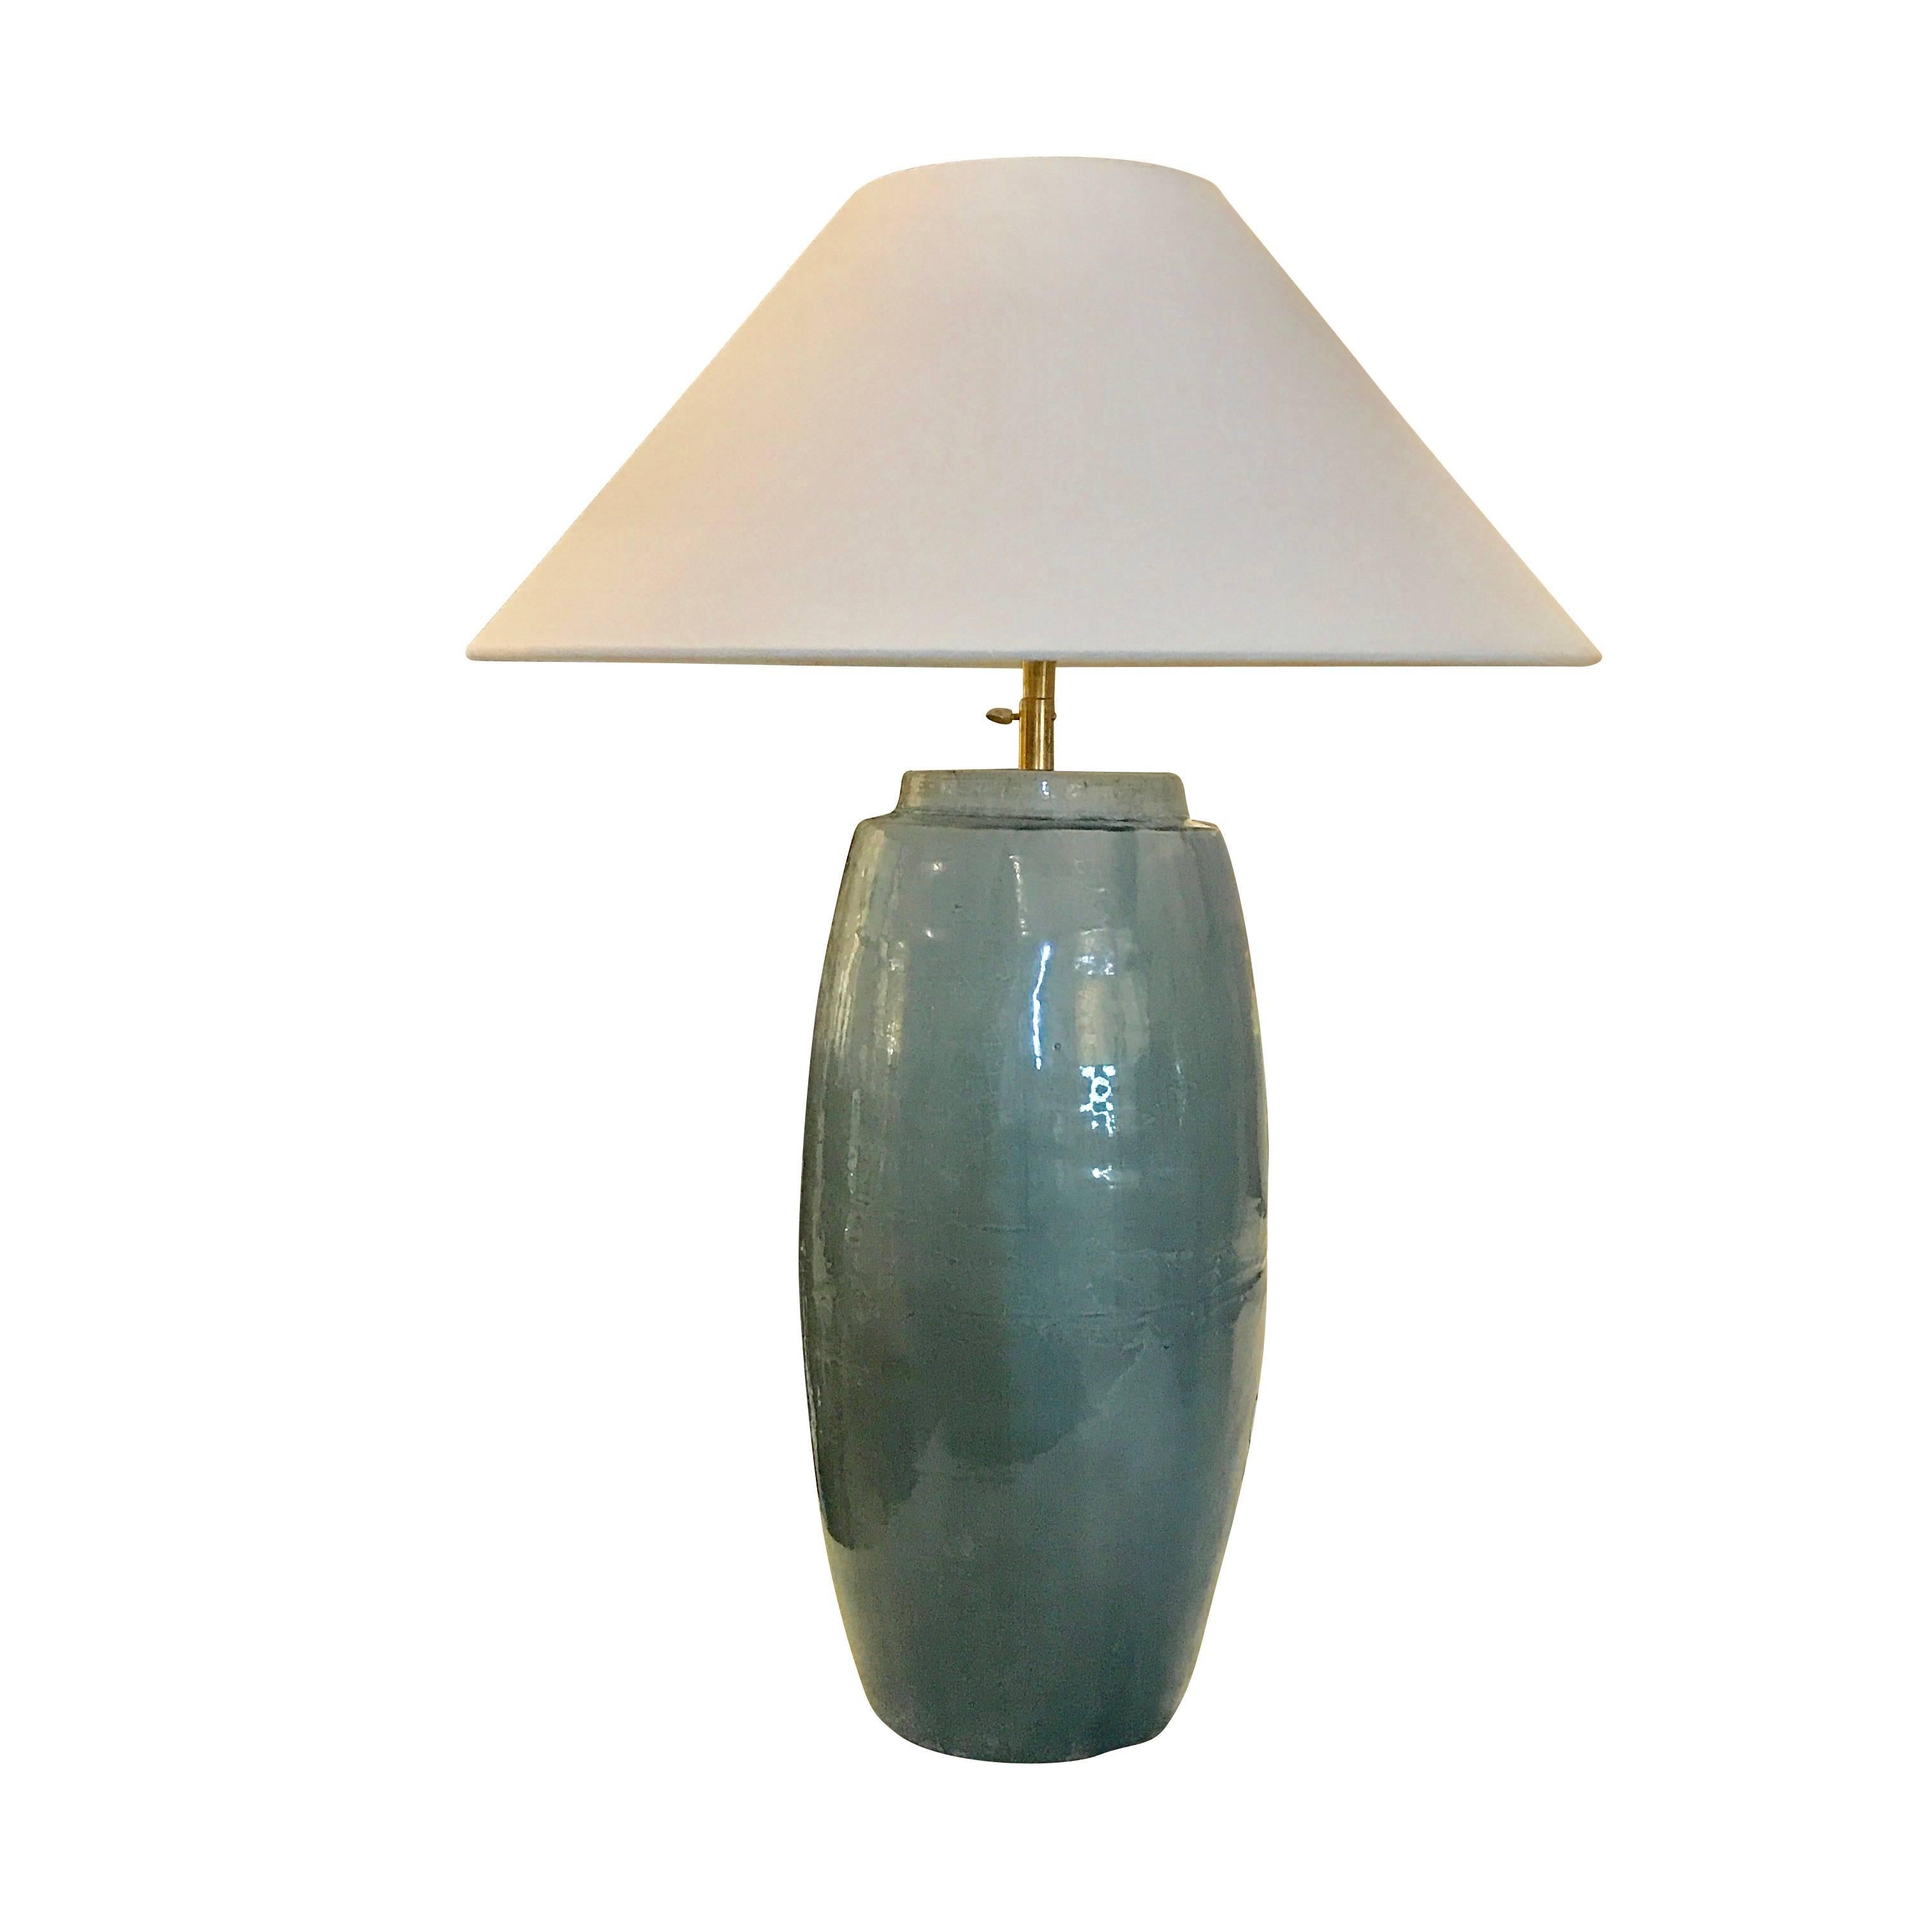 Contemporary Chinese pair cylinder shaped washed turquoise glazed lamps.
New linen shades.
Newly wired.
Fixture height without shade is 24.5